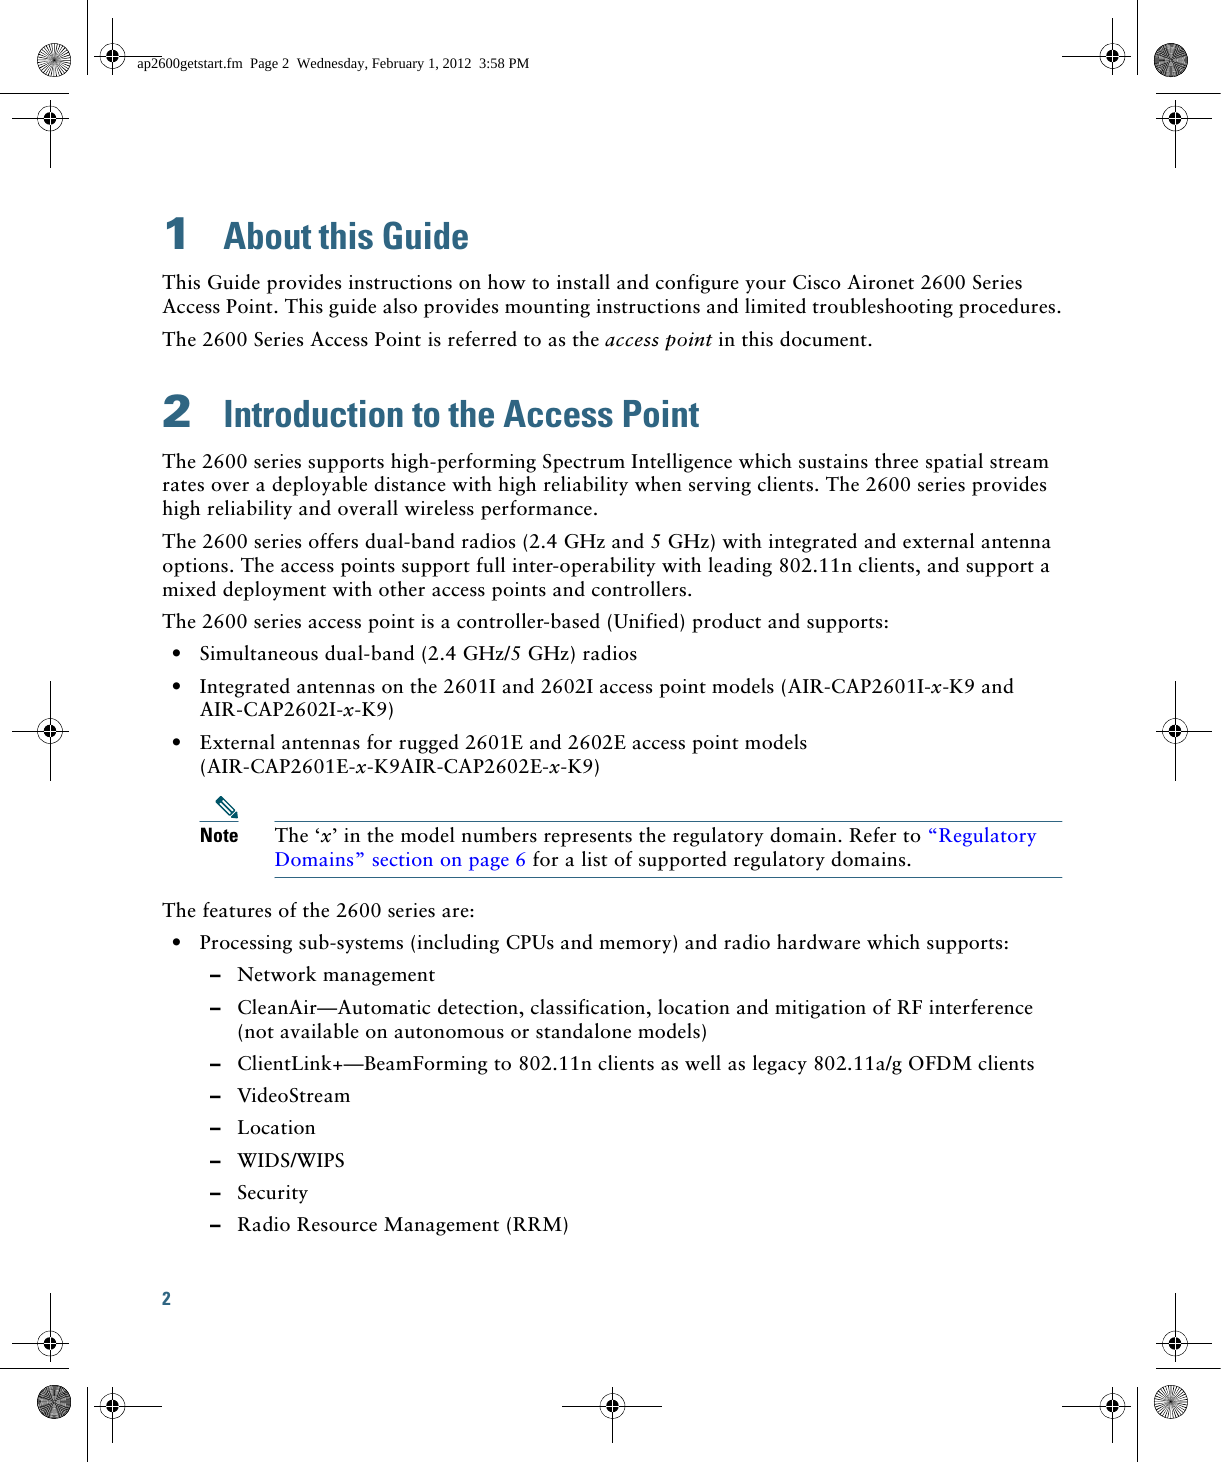 2 1  About this GuideThis Guide provides instructions on how to install and configure your Cisco Aironet 2600 Series Access Point. This guide also provides mounting instructions and limited troubleshooting procedures.The 2600 Series Access Point is referred to as the access point in this document.2  Introduction to the Access PointThe 2600 series supports high-performing Spectrum Intelligence which sustains three spatial stream rates over a deployable distance with high reliability when serving clients. The 2600 series provides high reliability and overall wireless performance.The 2600 series offers dual-band radios (2.4 GHz and 5 GHz) with integrated and external antenna options. The access points support full inter-operability with leading 802.11n clients, and support a mixed deployment with other access points and controllers.The 2600 series access point is a controller-based (Unified) product and supports:  • Simultaneous dual-band (2.4 GHz/5 GHz) radios  • Integrated antennas on the 2601I and 2602I access point models (AIR-CAP2601I-x-K9 and AIR-CAP2602I-x-K9)  • External antennas for rugged 2601E and 2602E access point models (AIR-CAP2601E-x-K9AIR-CAP2602E-x-K9)Note The ‘x’ in the model numbers represents the regulatory domain. Refer to “Regulatory Domains” section on page 6 for a list of supported regulatory domains.The features of the 2600 series are:  • Processing sub-systems (including CPUs and memory) and radio hardware which supports:  –Network management  –CleanAir—Automatic detection, classification, location and mitigation of RF interference (not available on autonomous or standalone models)  –ClientLink+—BeamForming to 802.11n clients as well as legacy 802.11a/g OFDM clients   –VideoStream  –Location  –WIDS/WIPS  –Security  –Radio Resource Management (RRM)ap2600getstart.fm  Page 2  Wednesday, February 1, 2012  3:58 PM